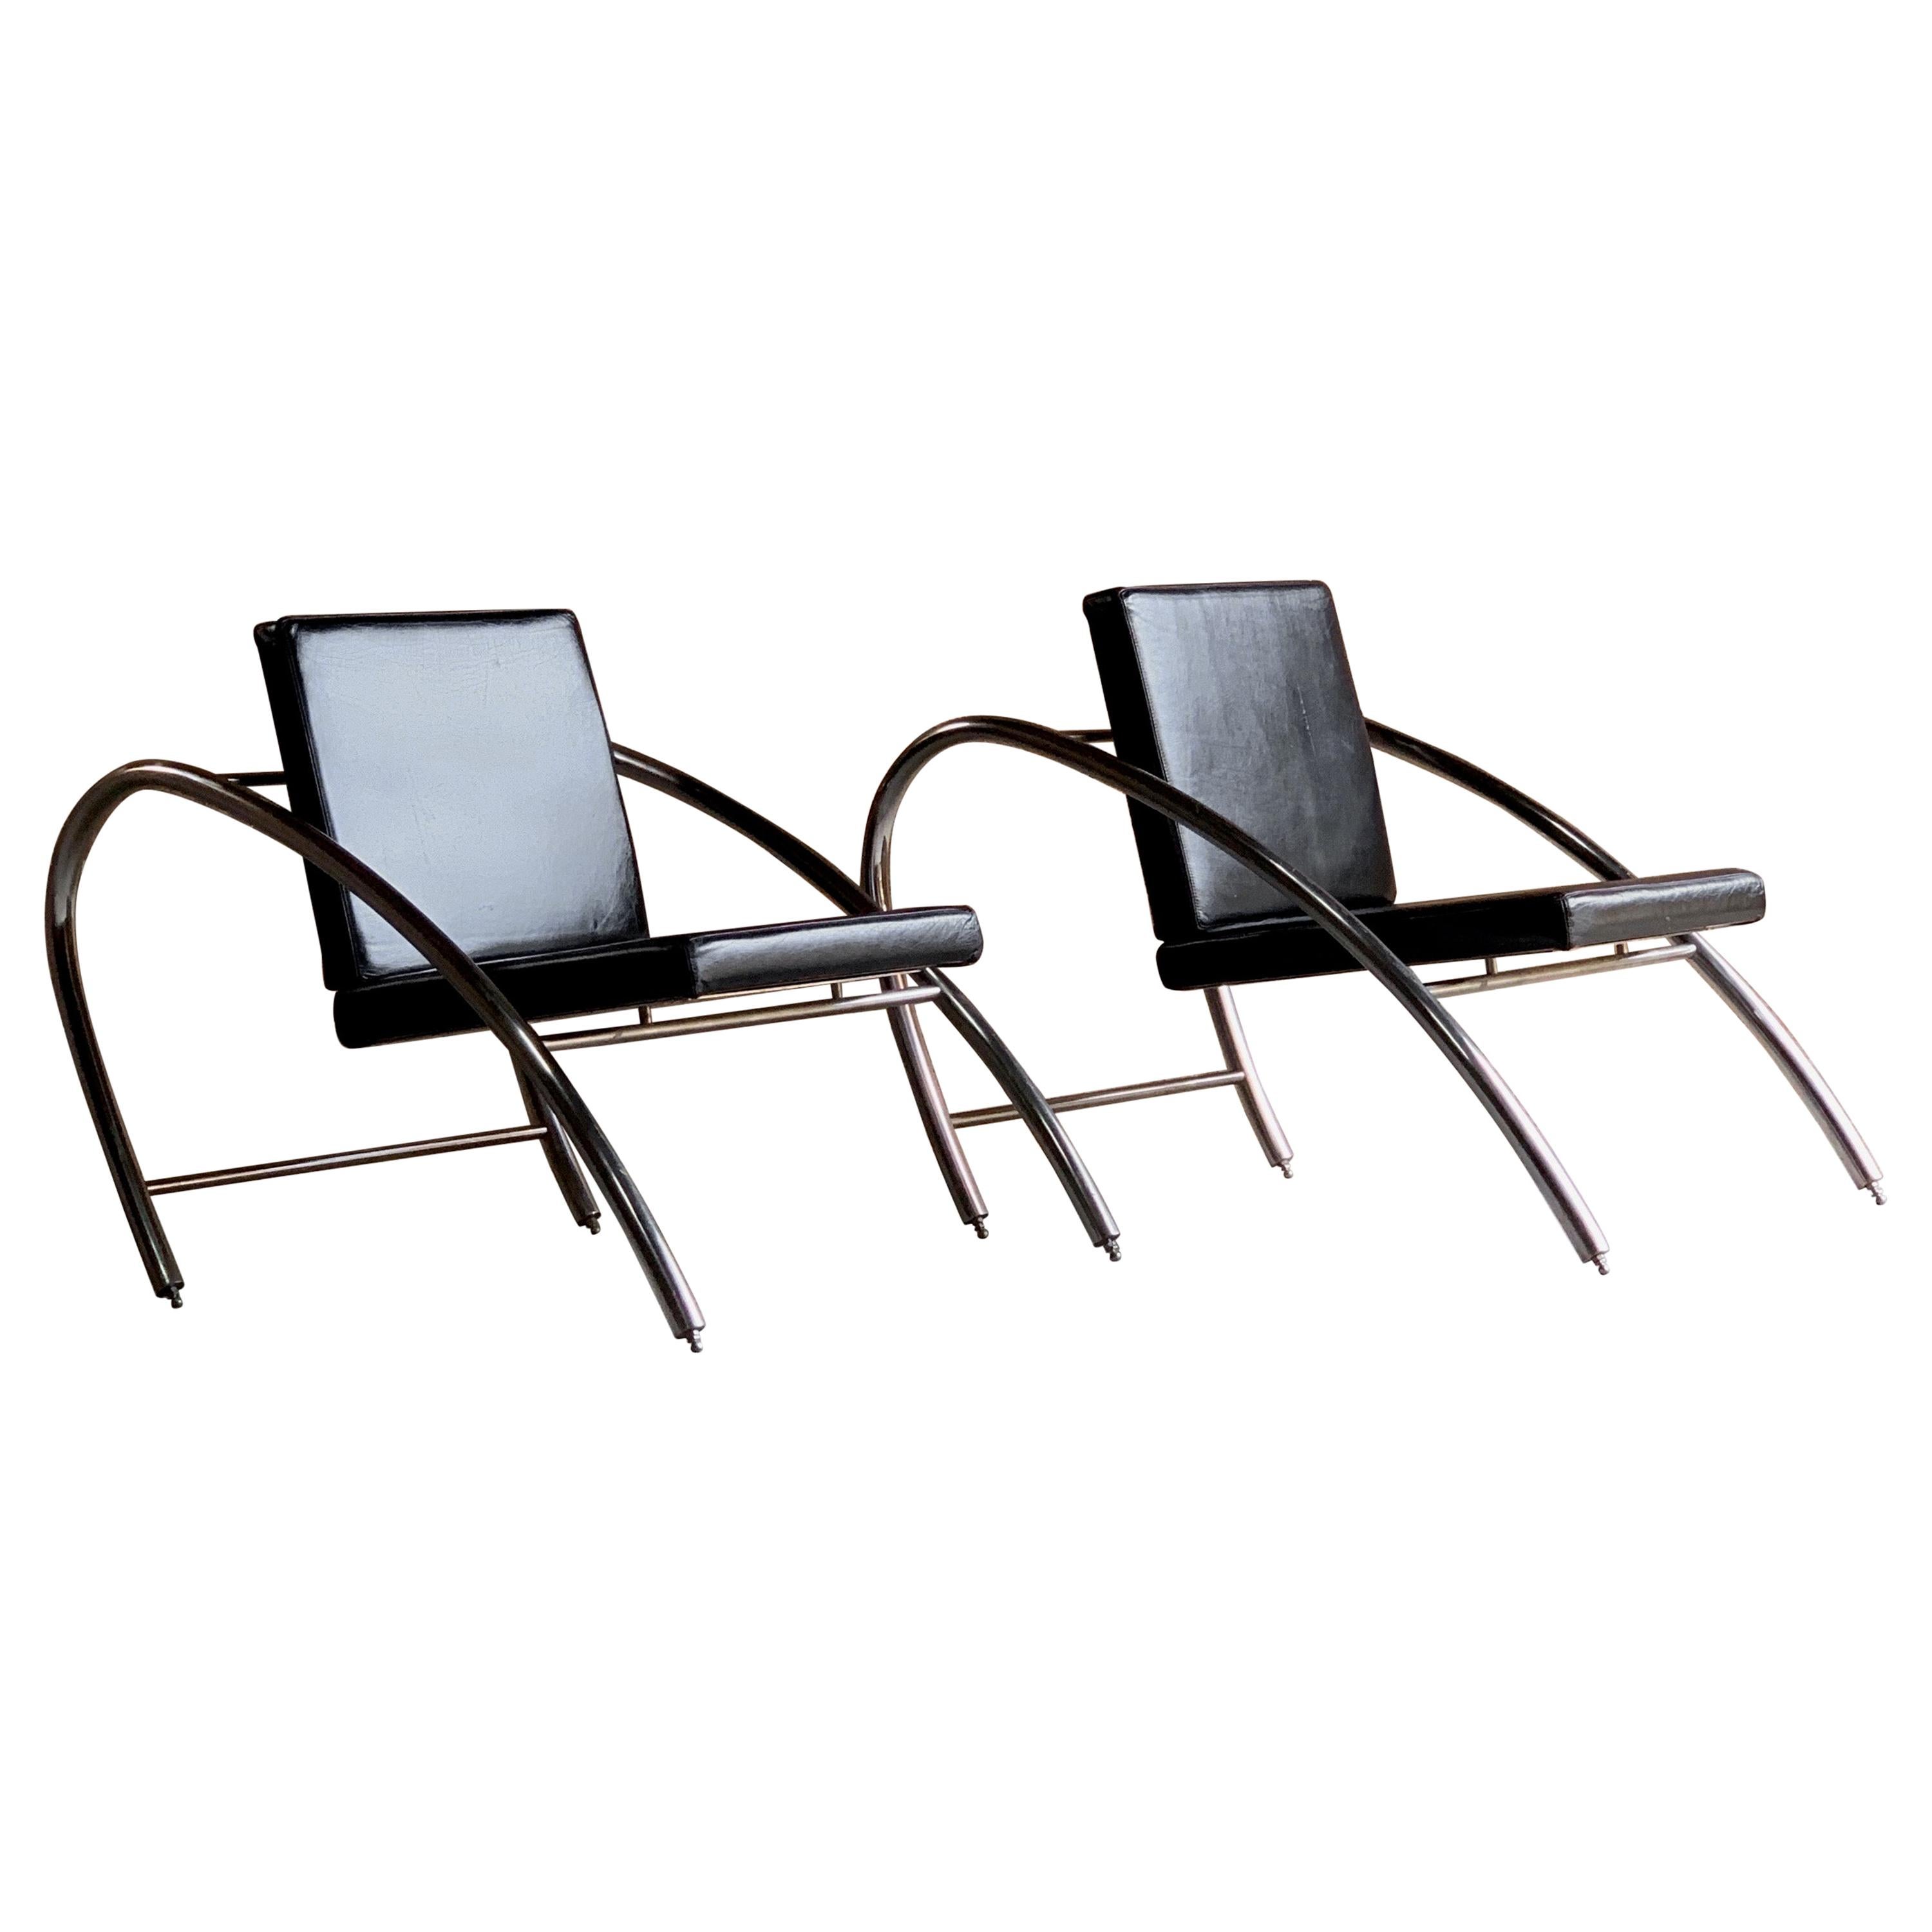 Moreno chrome and leather lounge chairs by Francois Scali & Alain Domingo for Nemo, circa 1983.

A pair of Moreno chrome and leather lounge chairs, designed by Francois Scali and Alain Domingo for Nemo, circa 1983.

Dimensions:

Height 30”